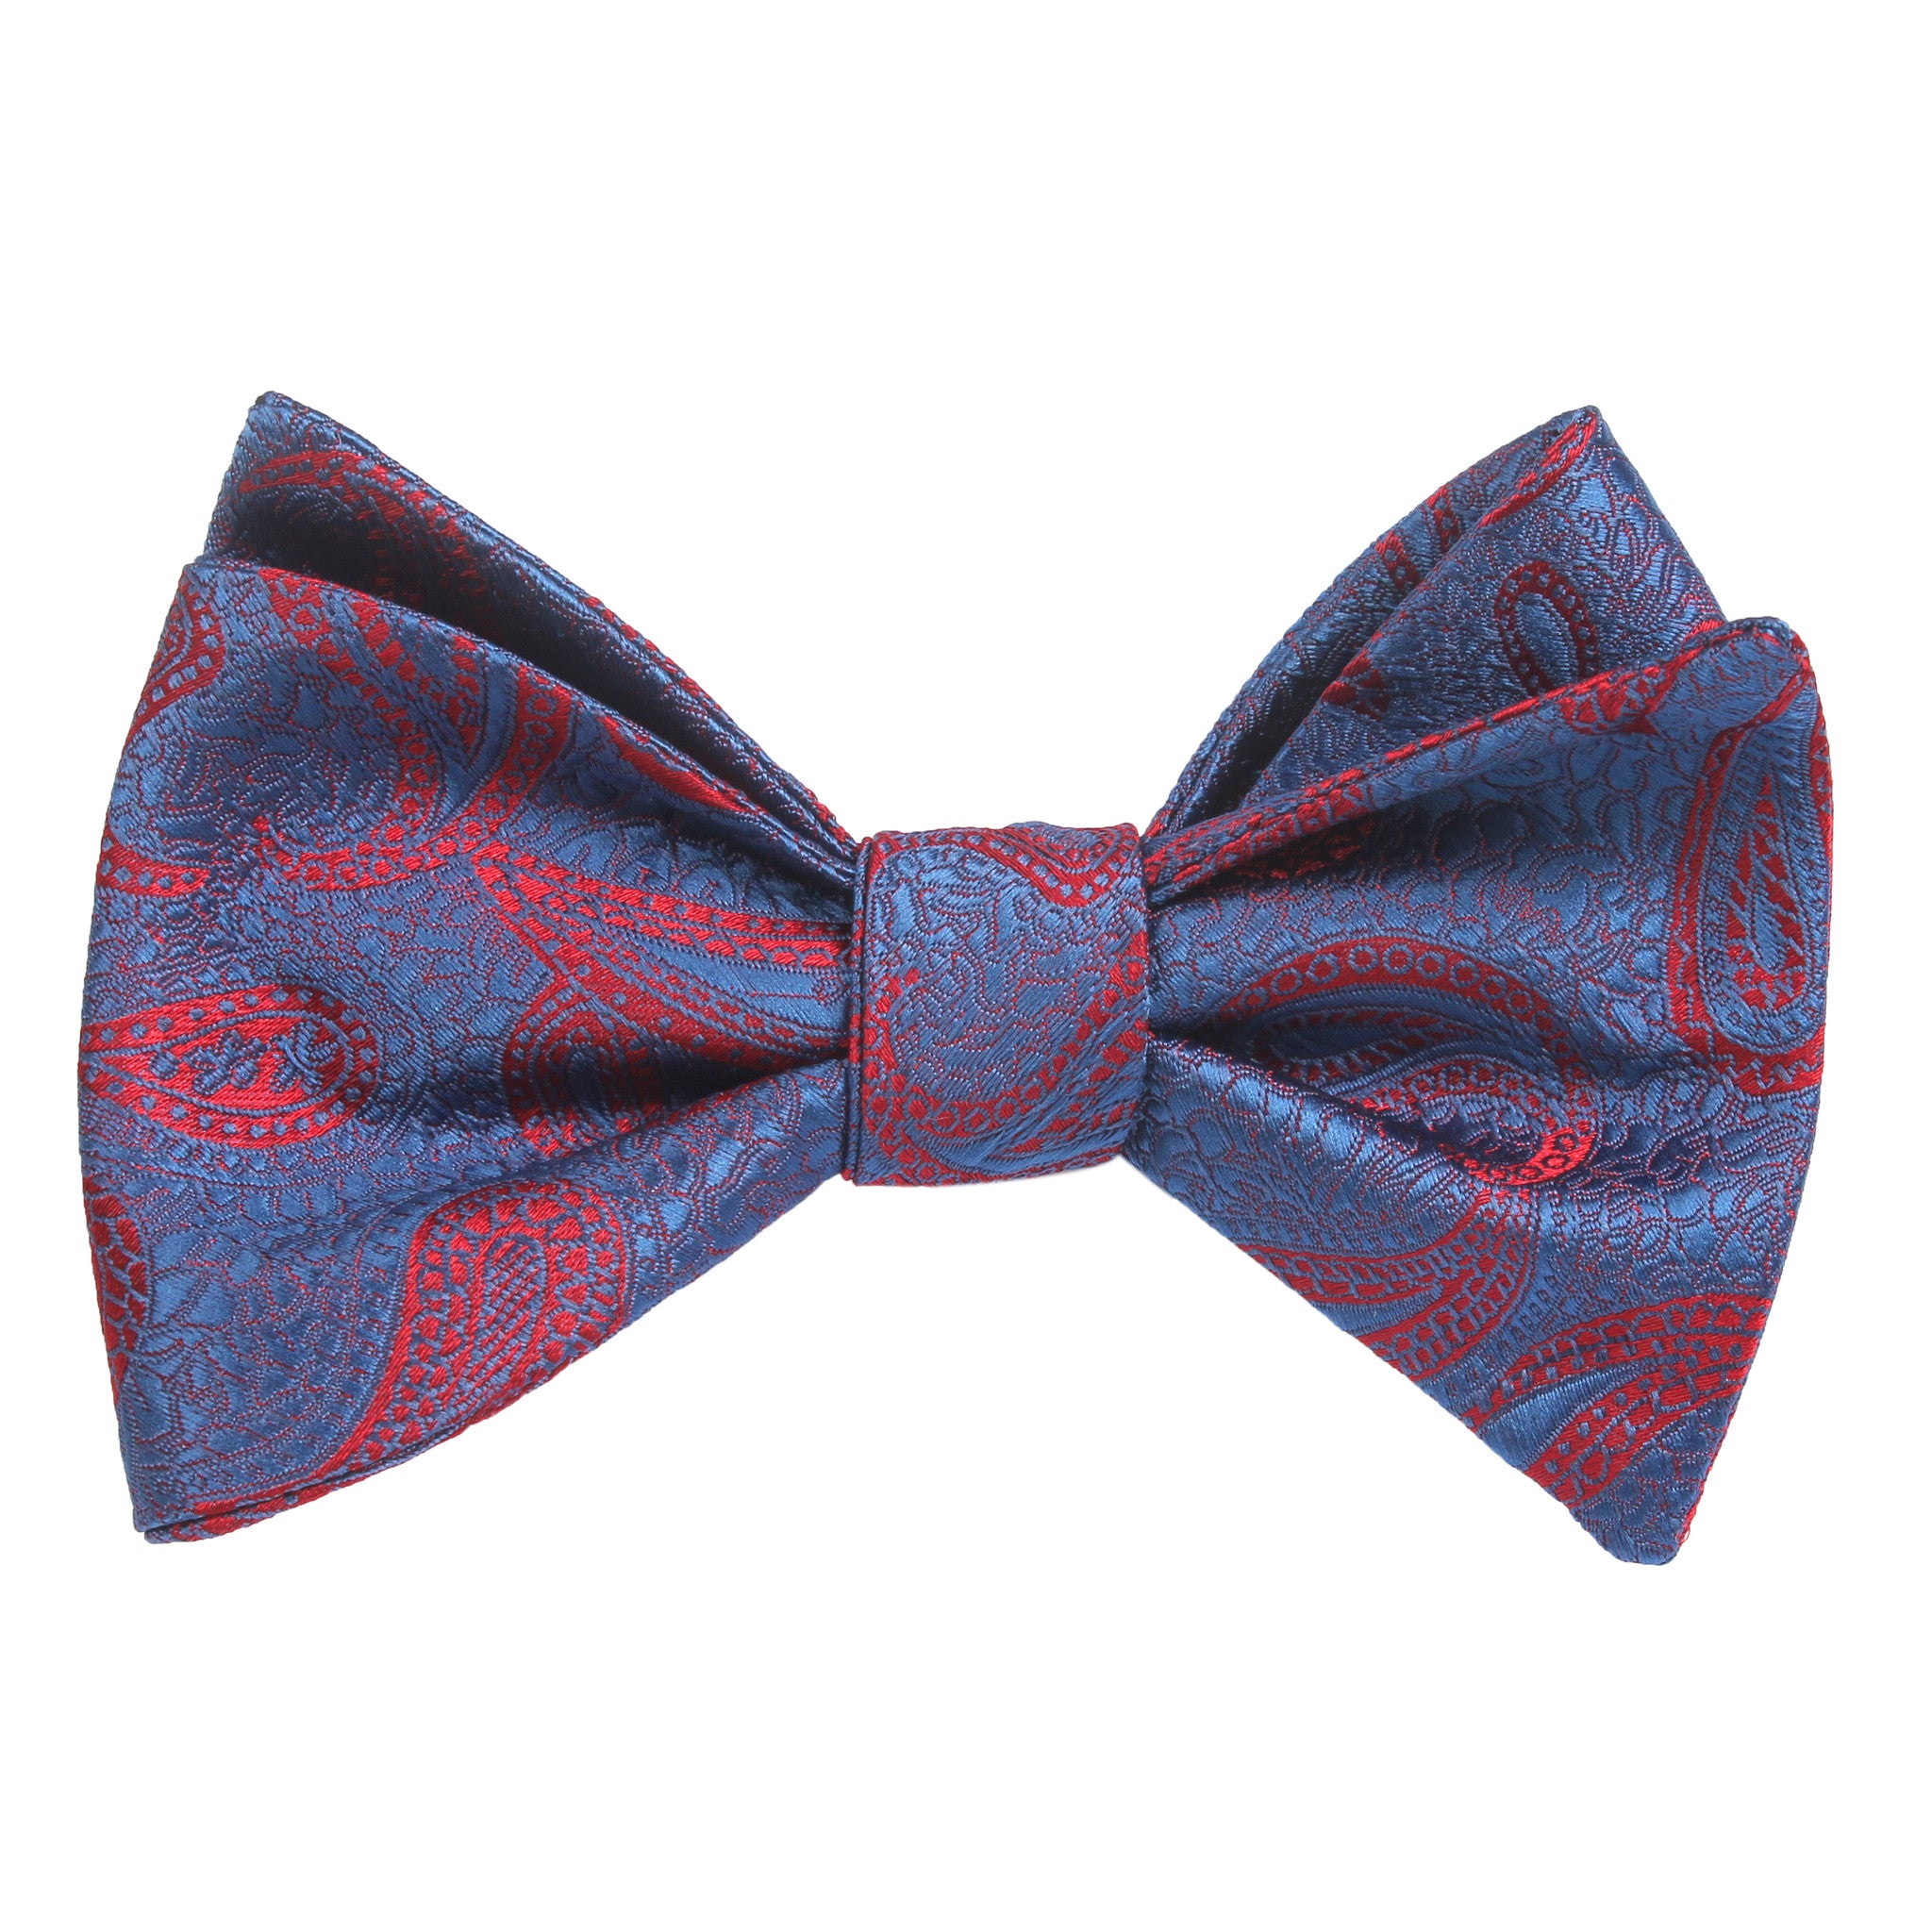 Paisley Purple and Red - Bow Tie (Untied)  Self tied knot by OTAA